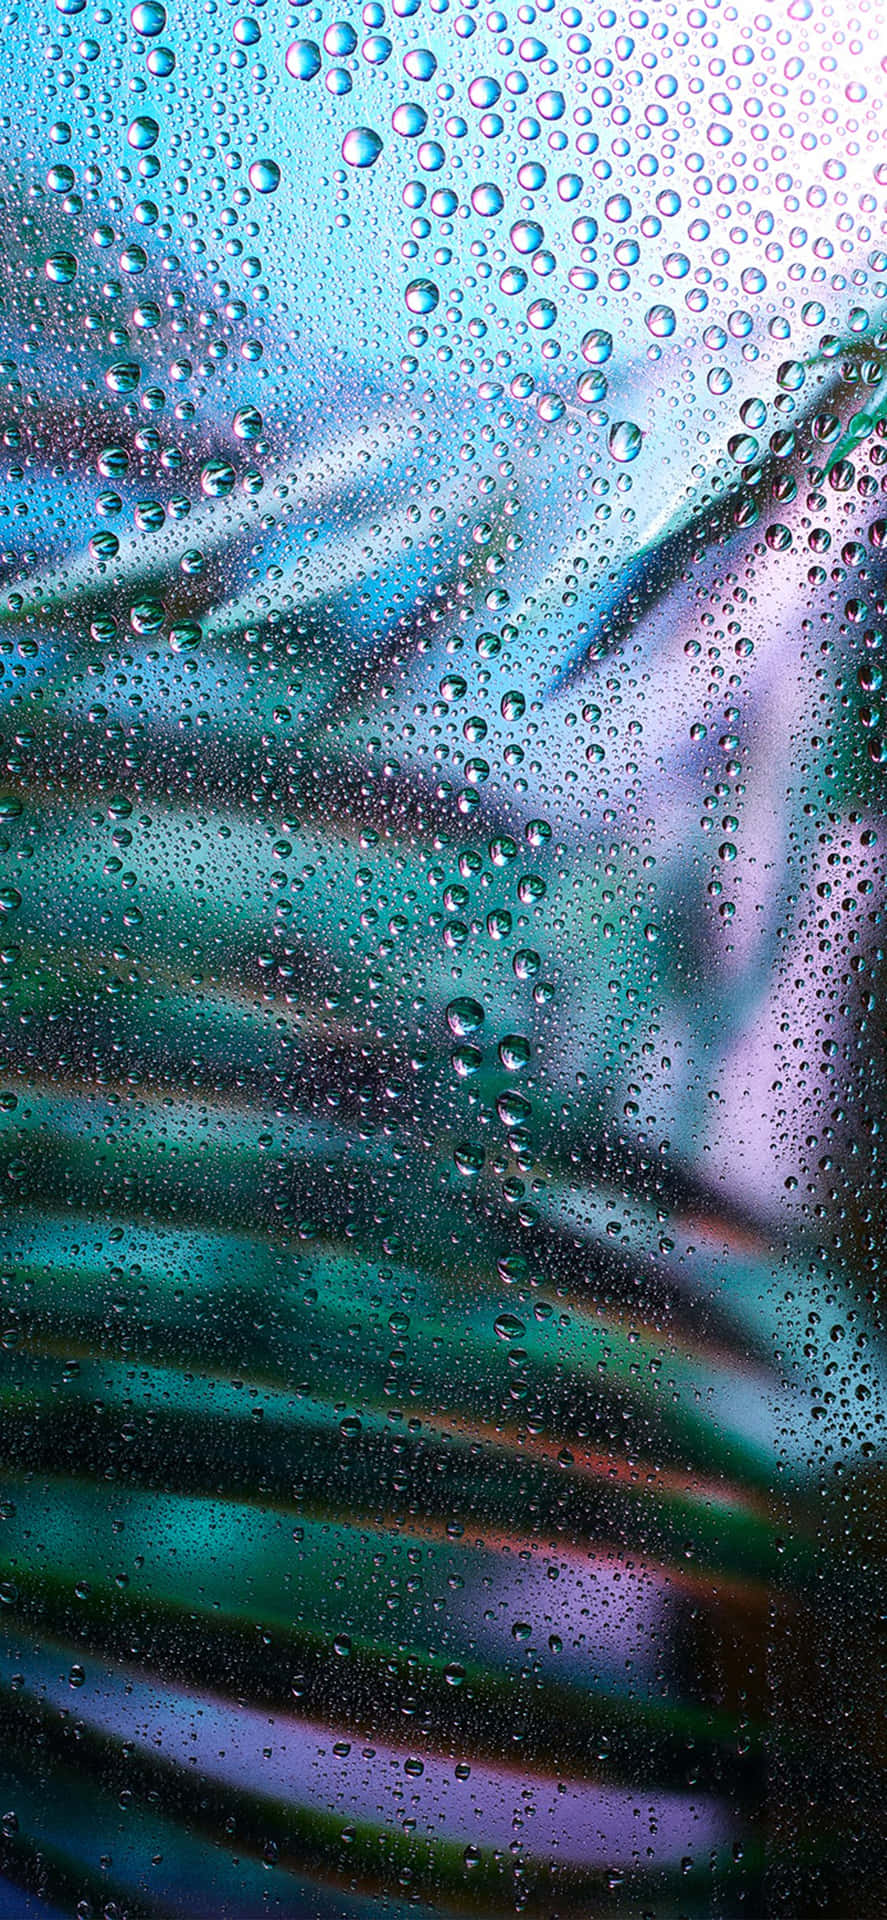 Exotic Water Droplets [wallpaper] Background